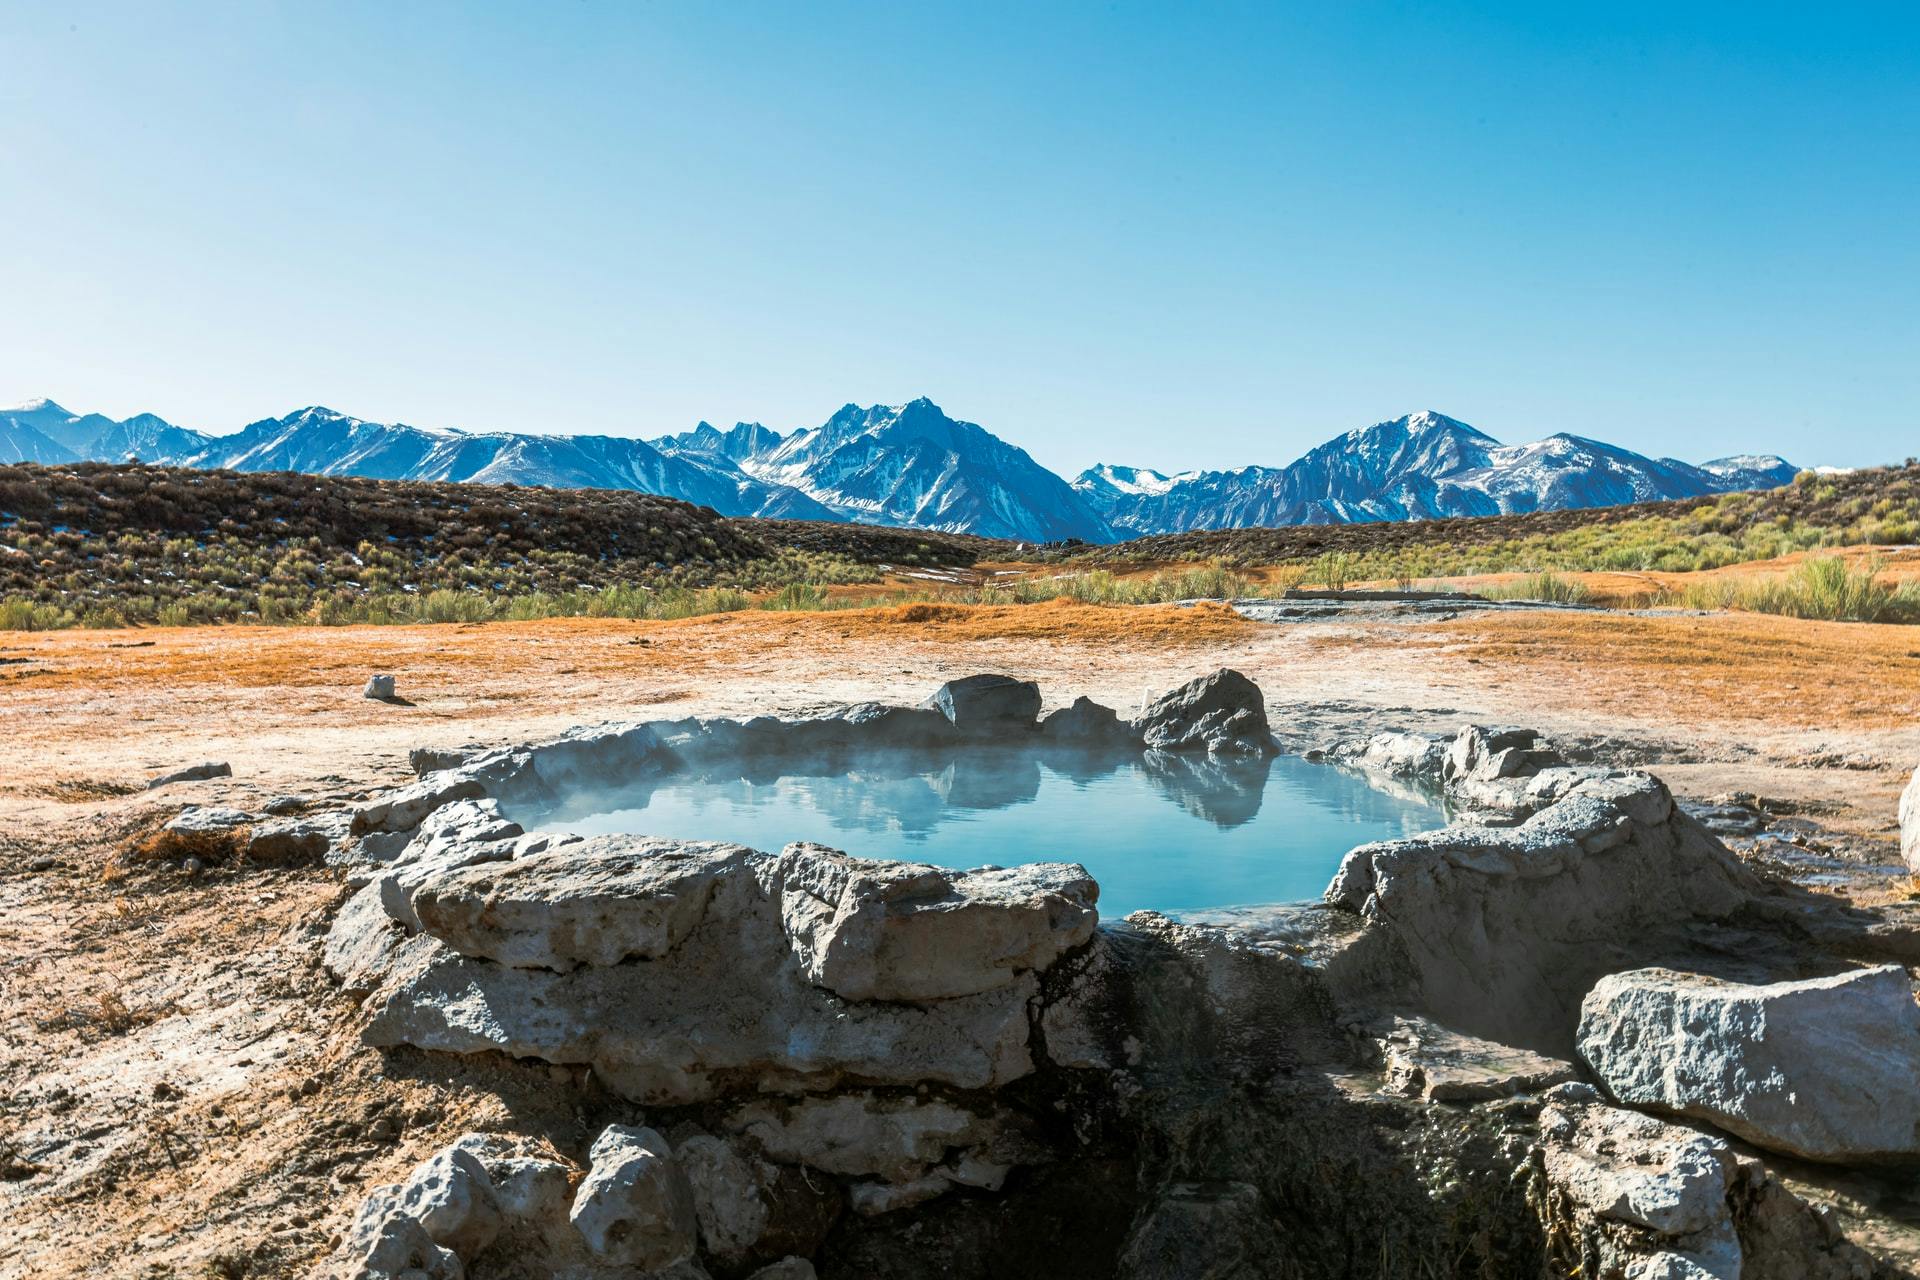 A hot springs with mountains and a field in the background.